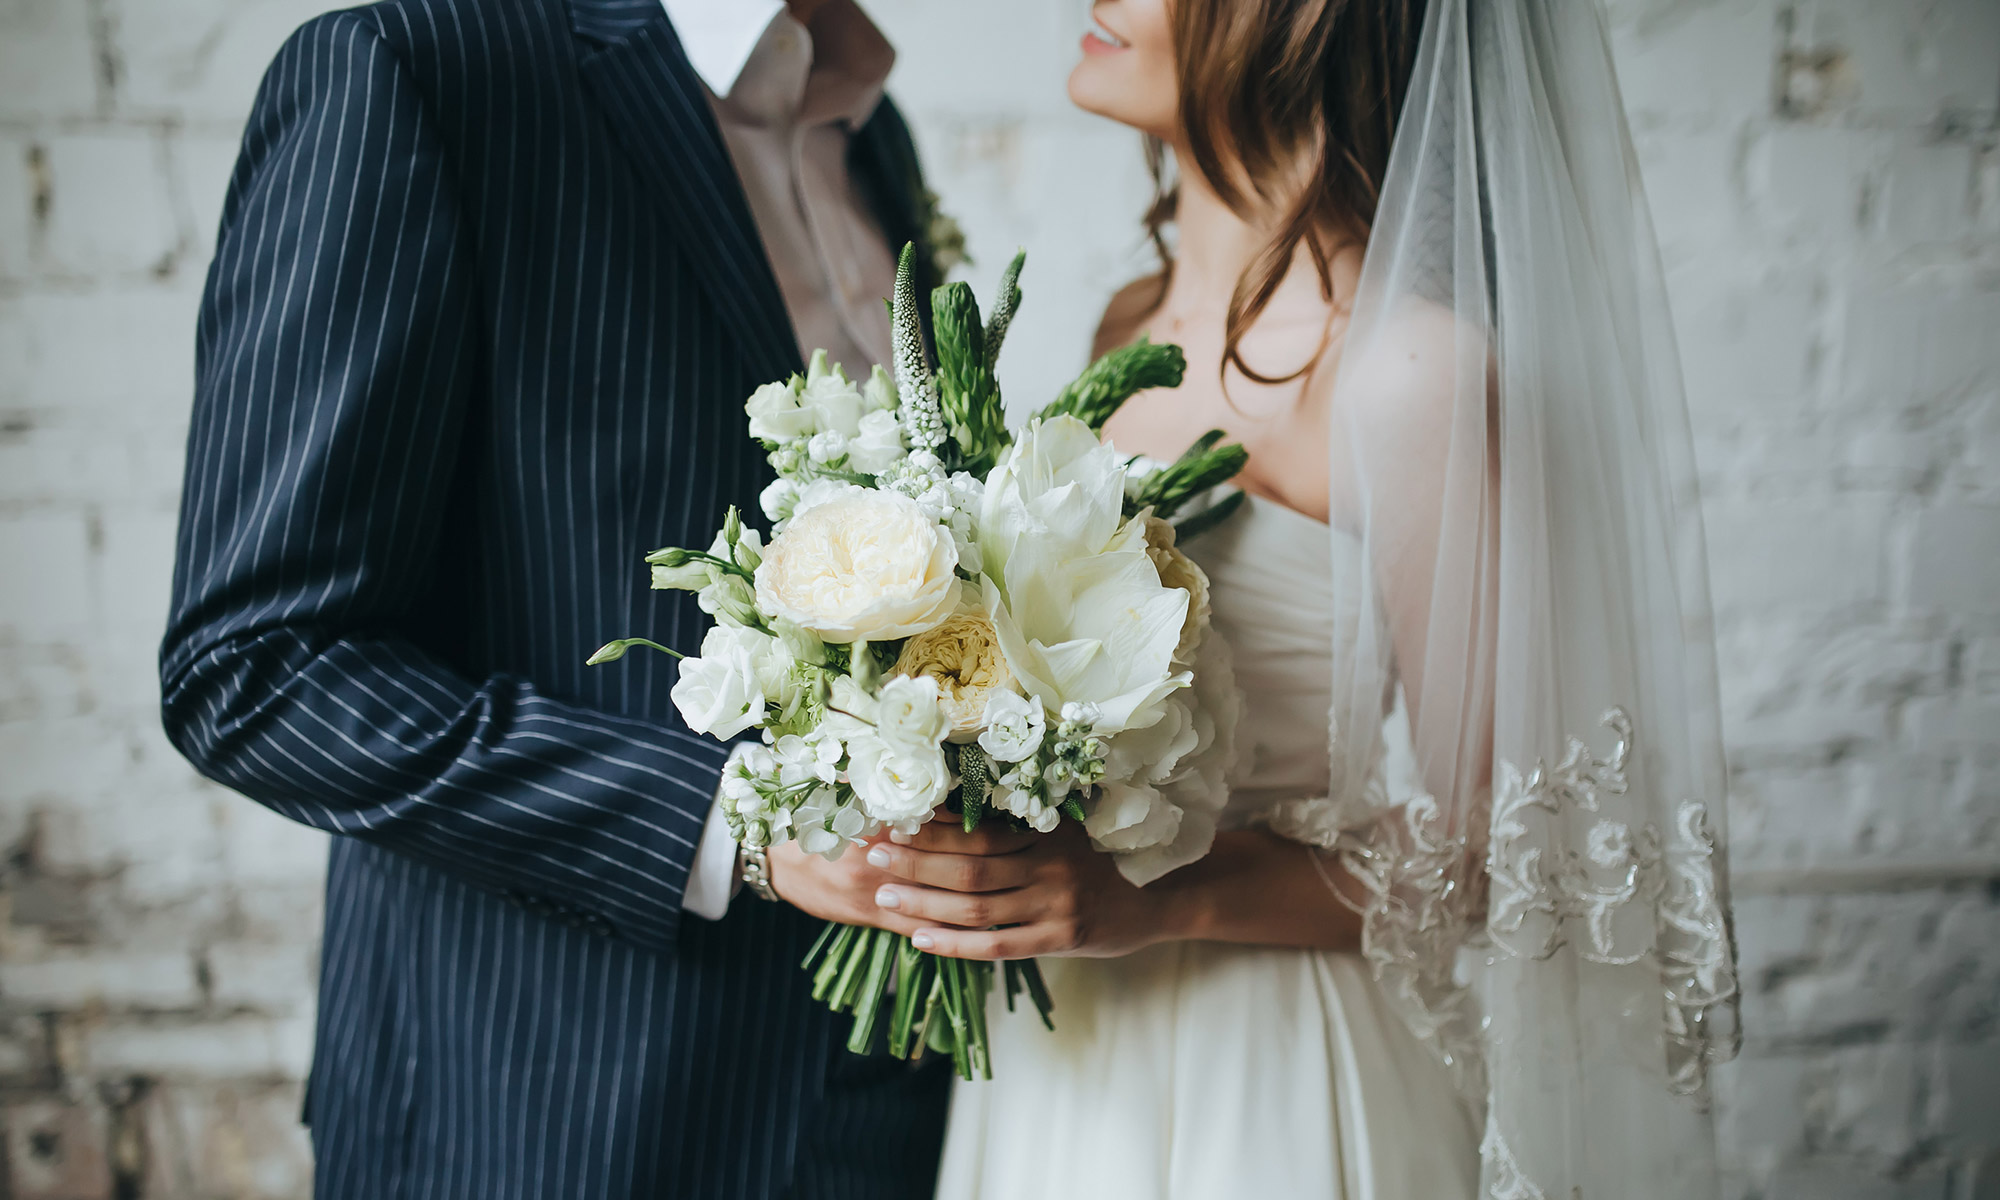 Win Your Wedding – The Wedding Social 2019 Grand Prize